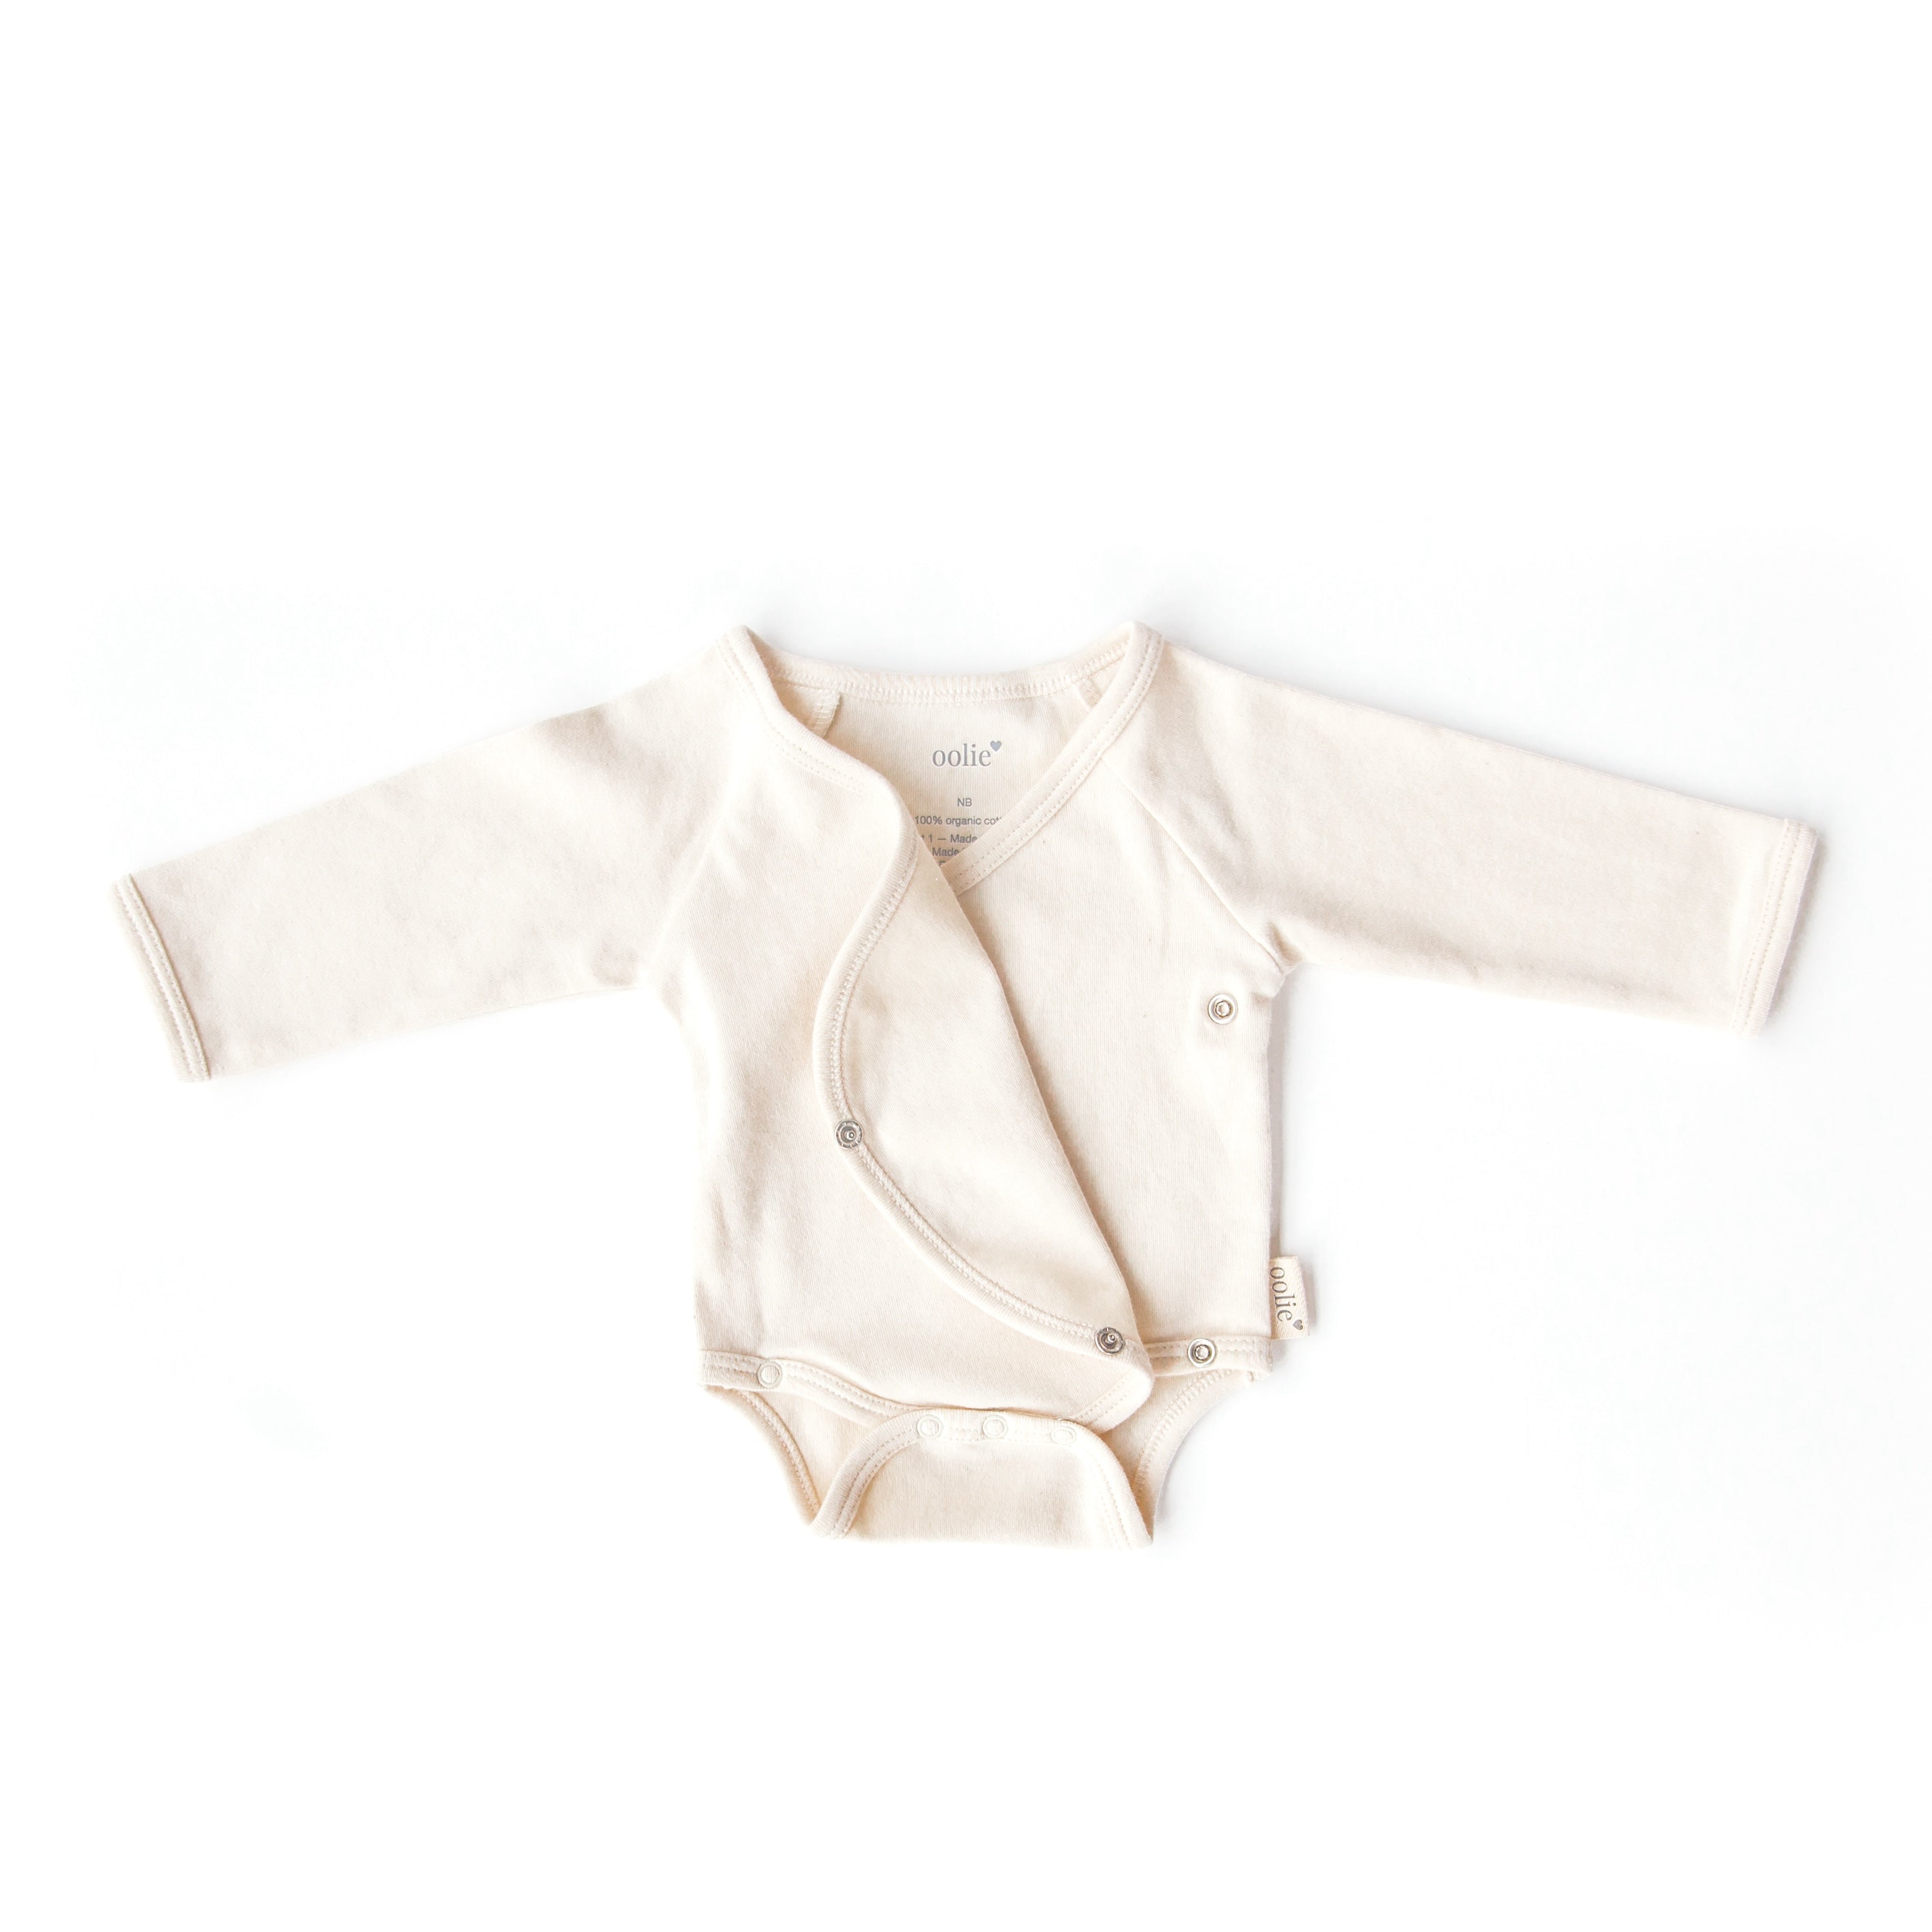 A natural color, Oolie organic cotton onesie, laid flat on a white background, with initial snaps unsnapped and the onesie&#39;s front flap folded back, kimono-style.